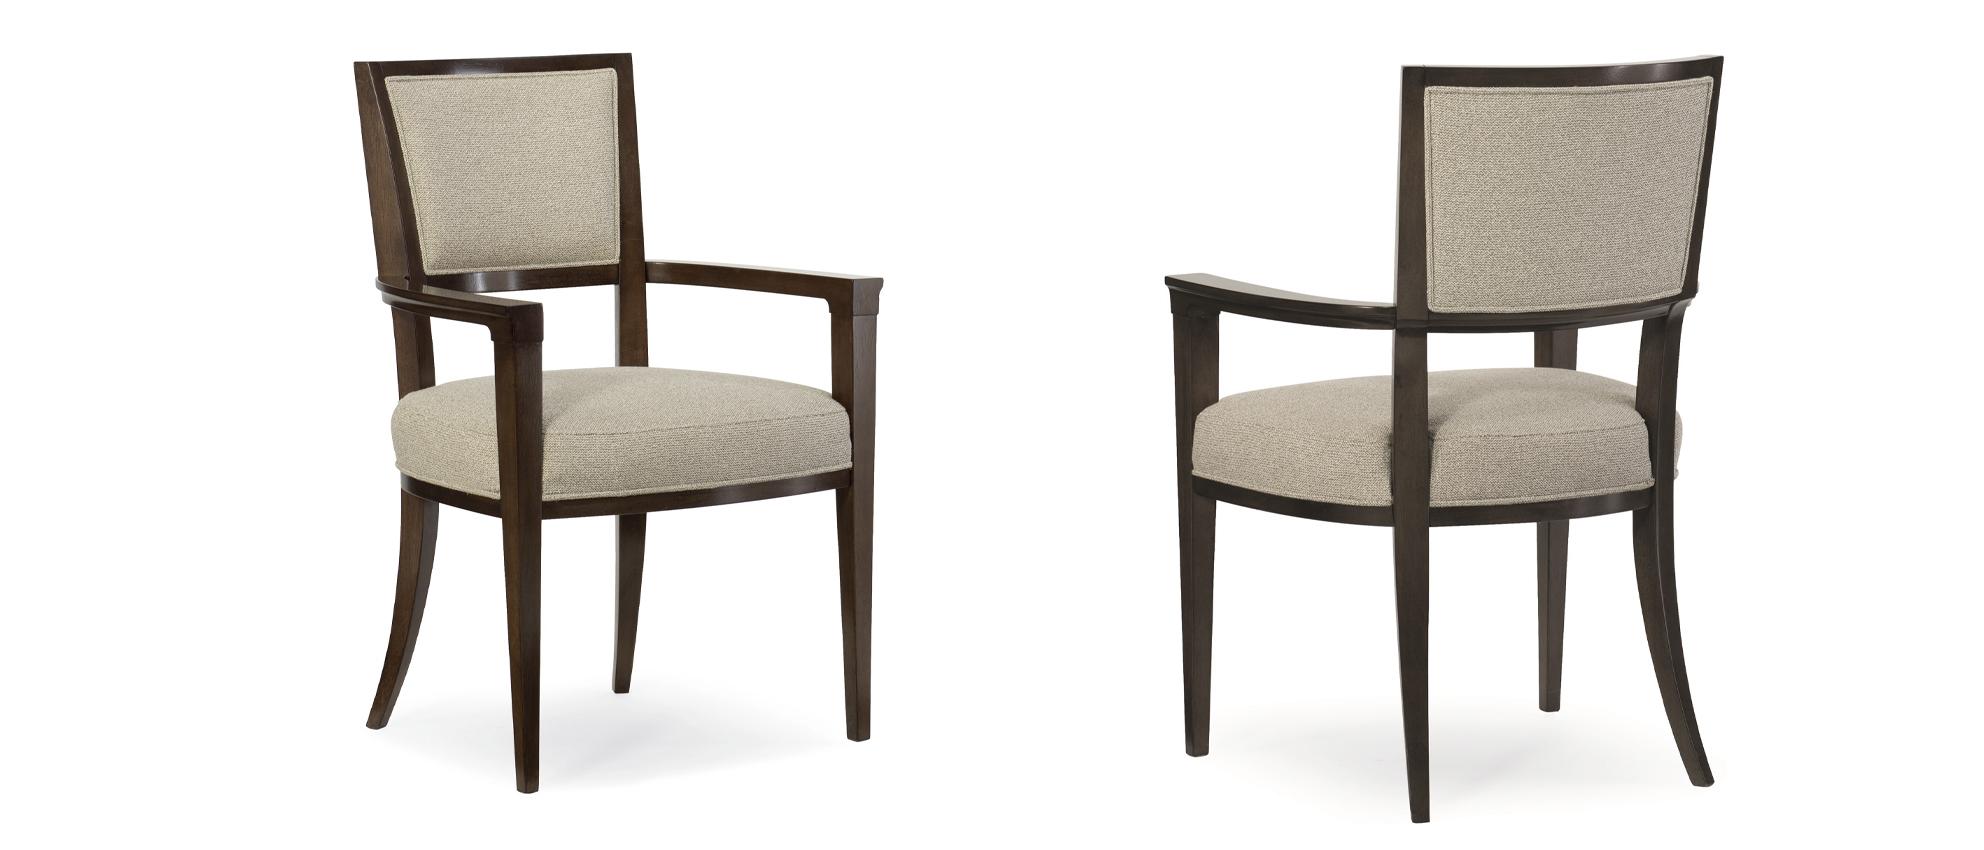 Contemporary Dining Arm Chair Set MODERNE ARM CHAIR M022-417-272-Set-2 in Brown, Beige Fabric